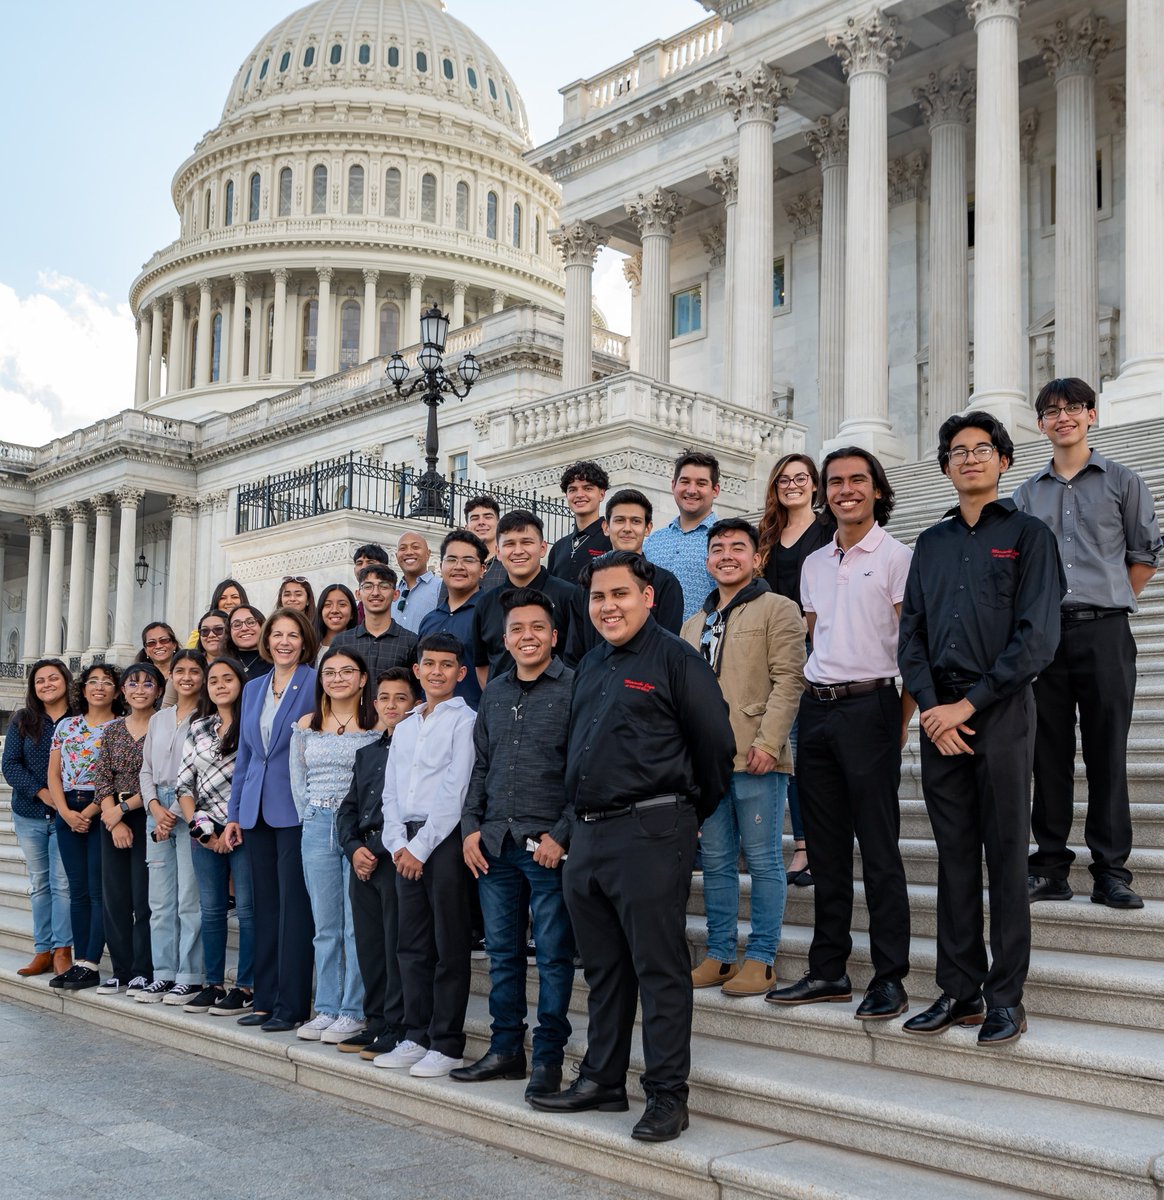 These Nevada student musicians played on the national stage at the 2021 inauguration, and I was thrilled to see them again today. Can't wait to see where @mariachijoyalv performs next!